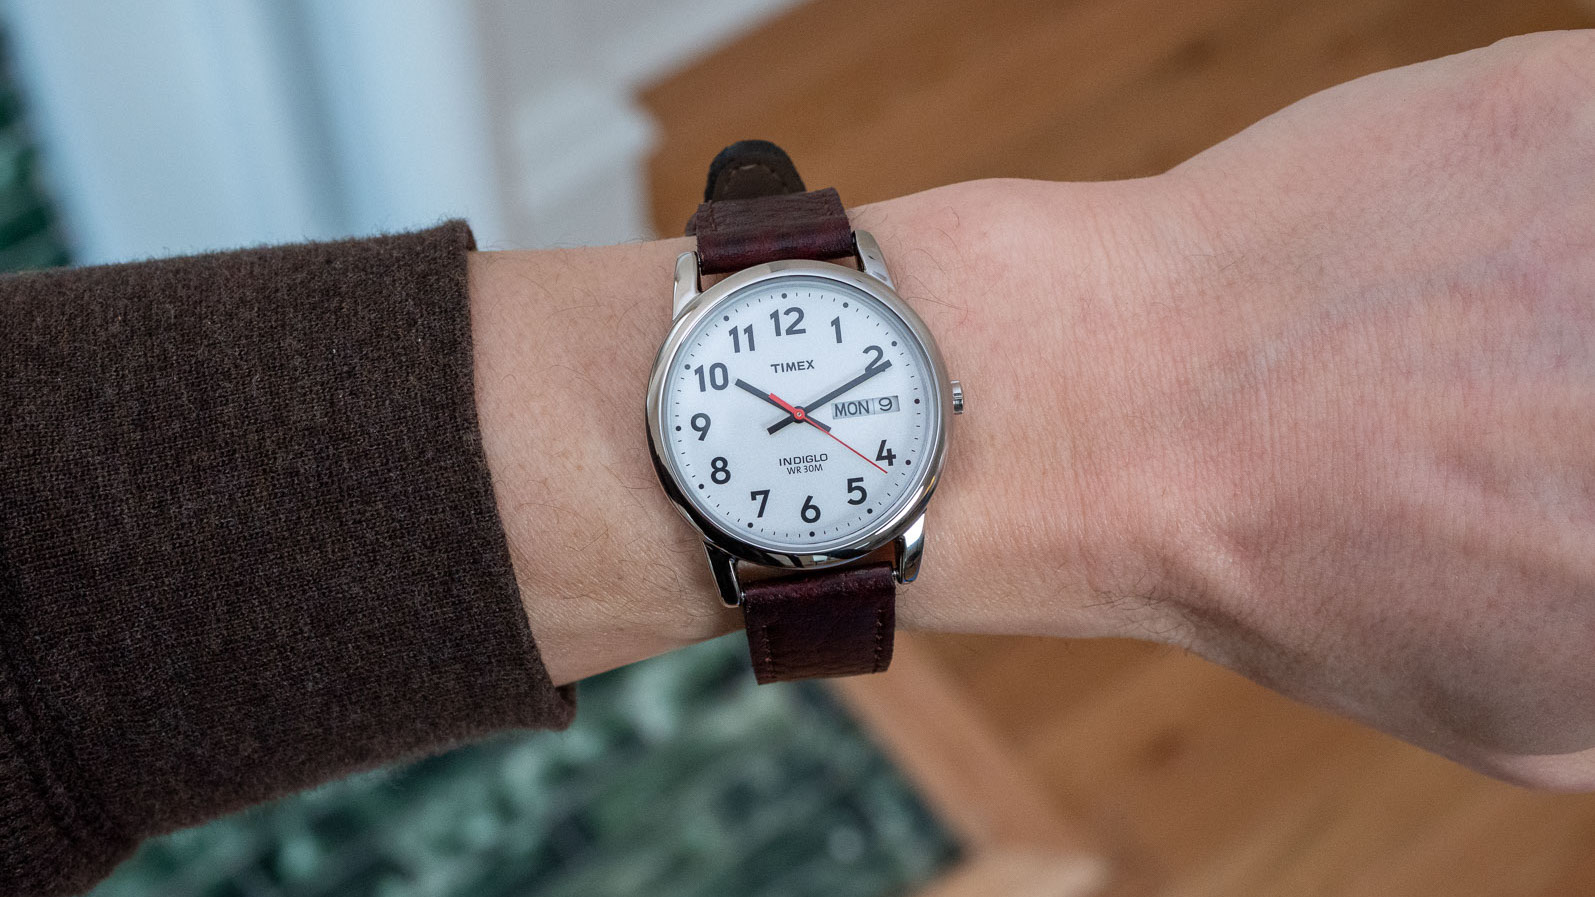 How To Change Day On Timex Watch